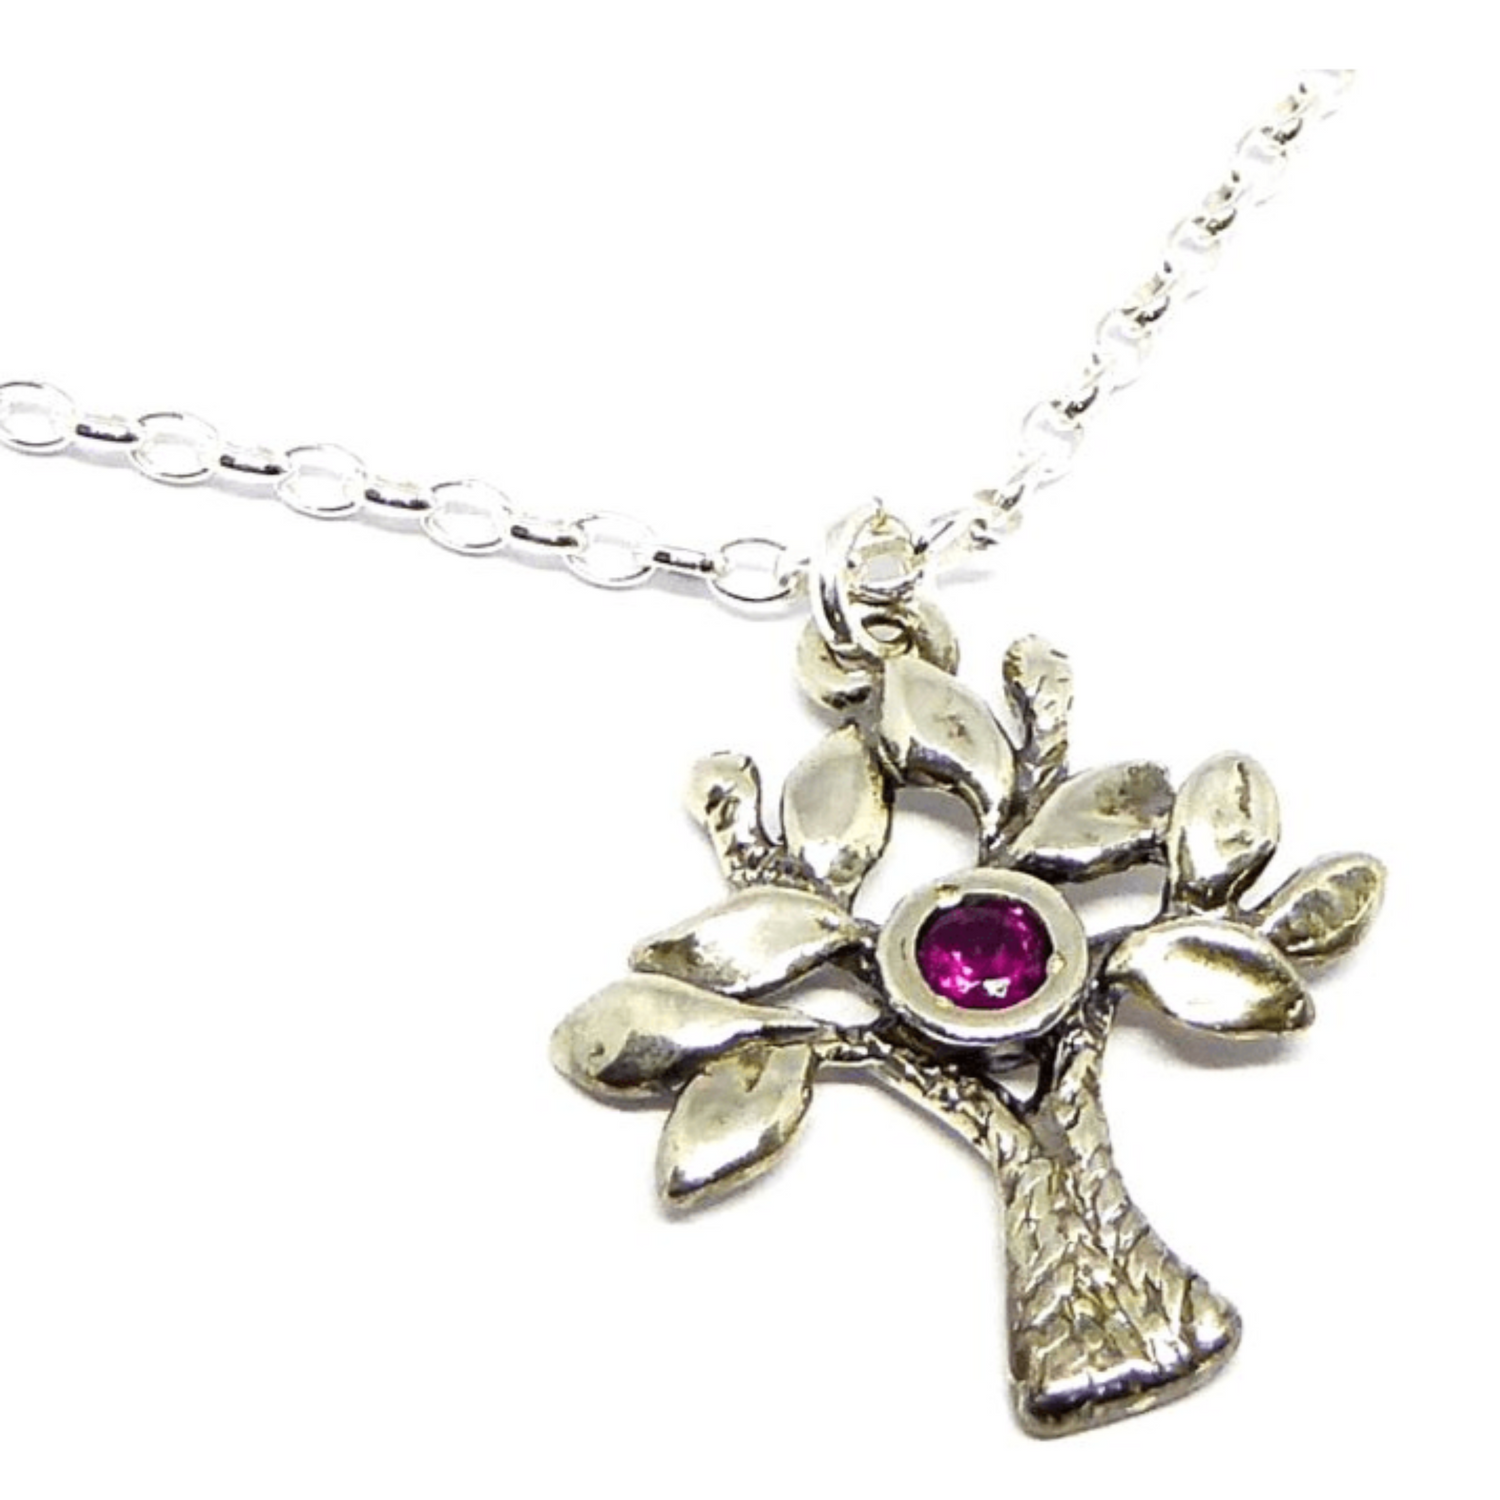 Bluenoemi Jewelry Necklaces sterling silver necklaces made in israel tree of life pendant for woman.